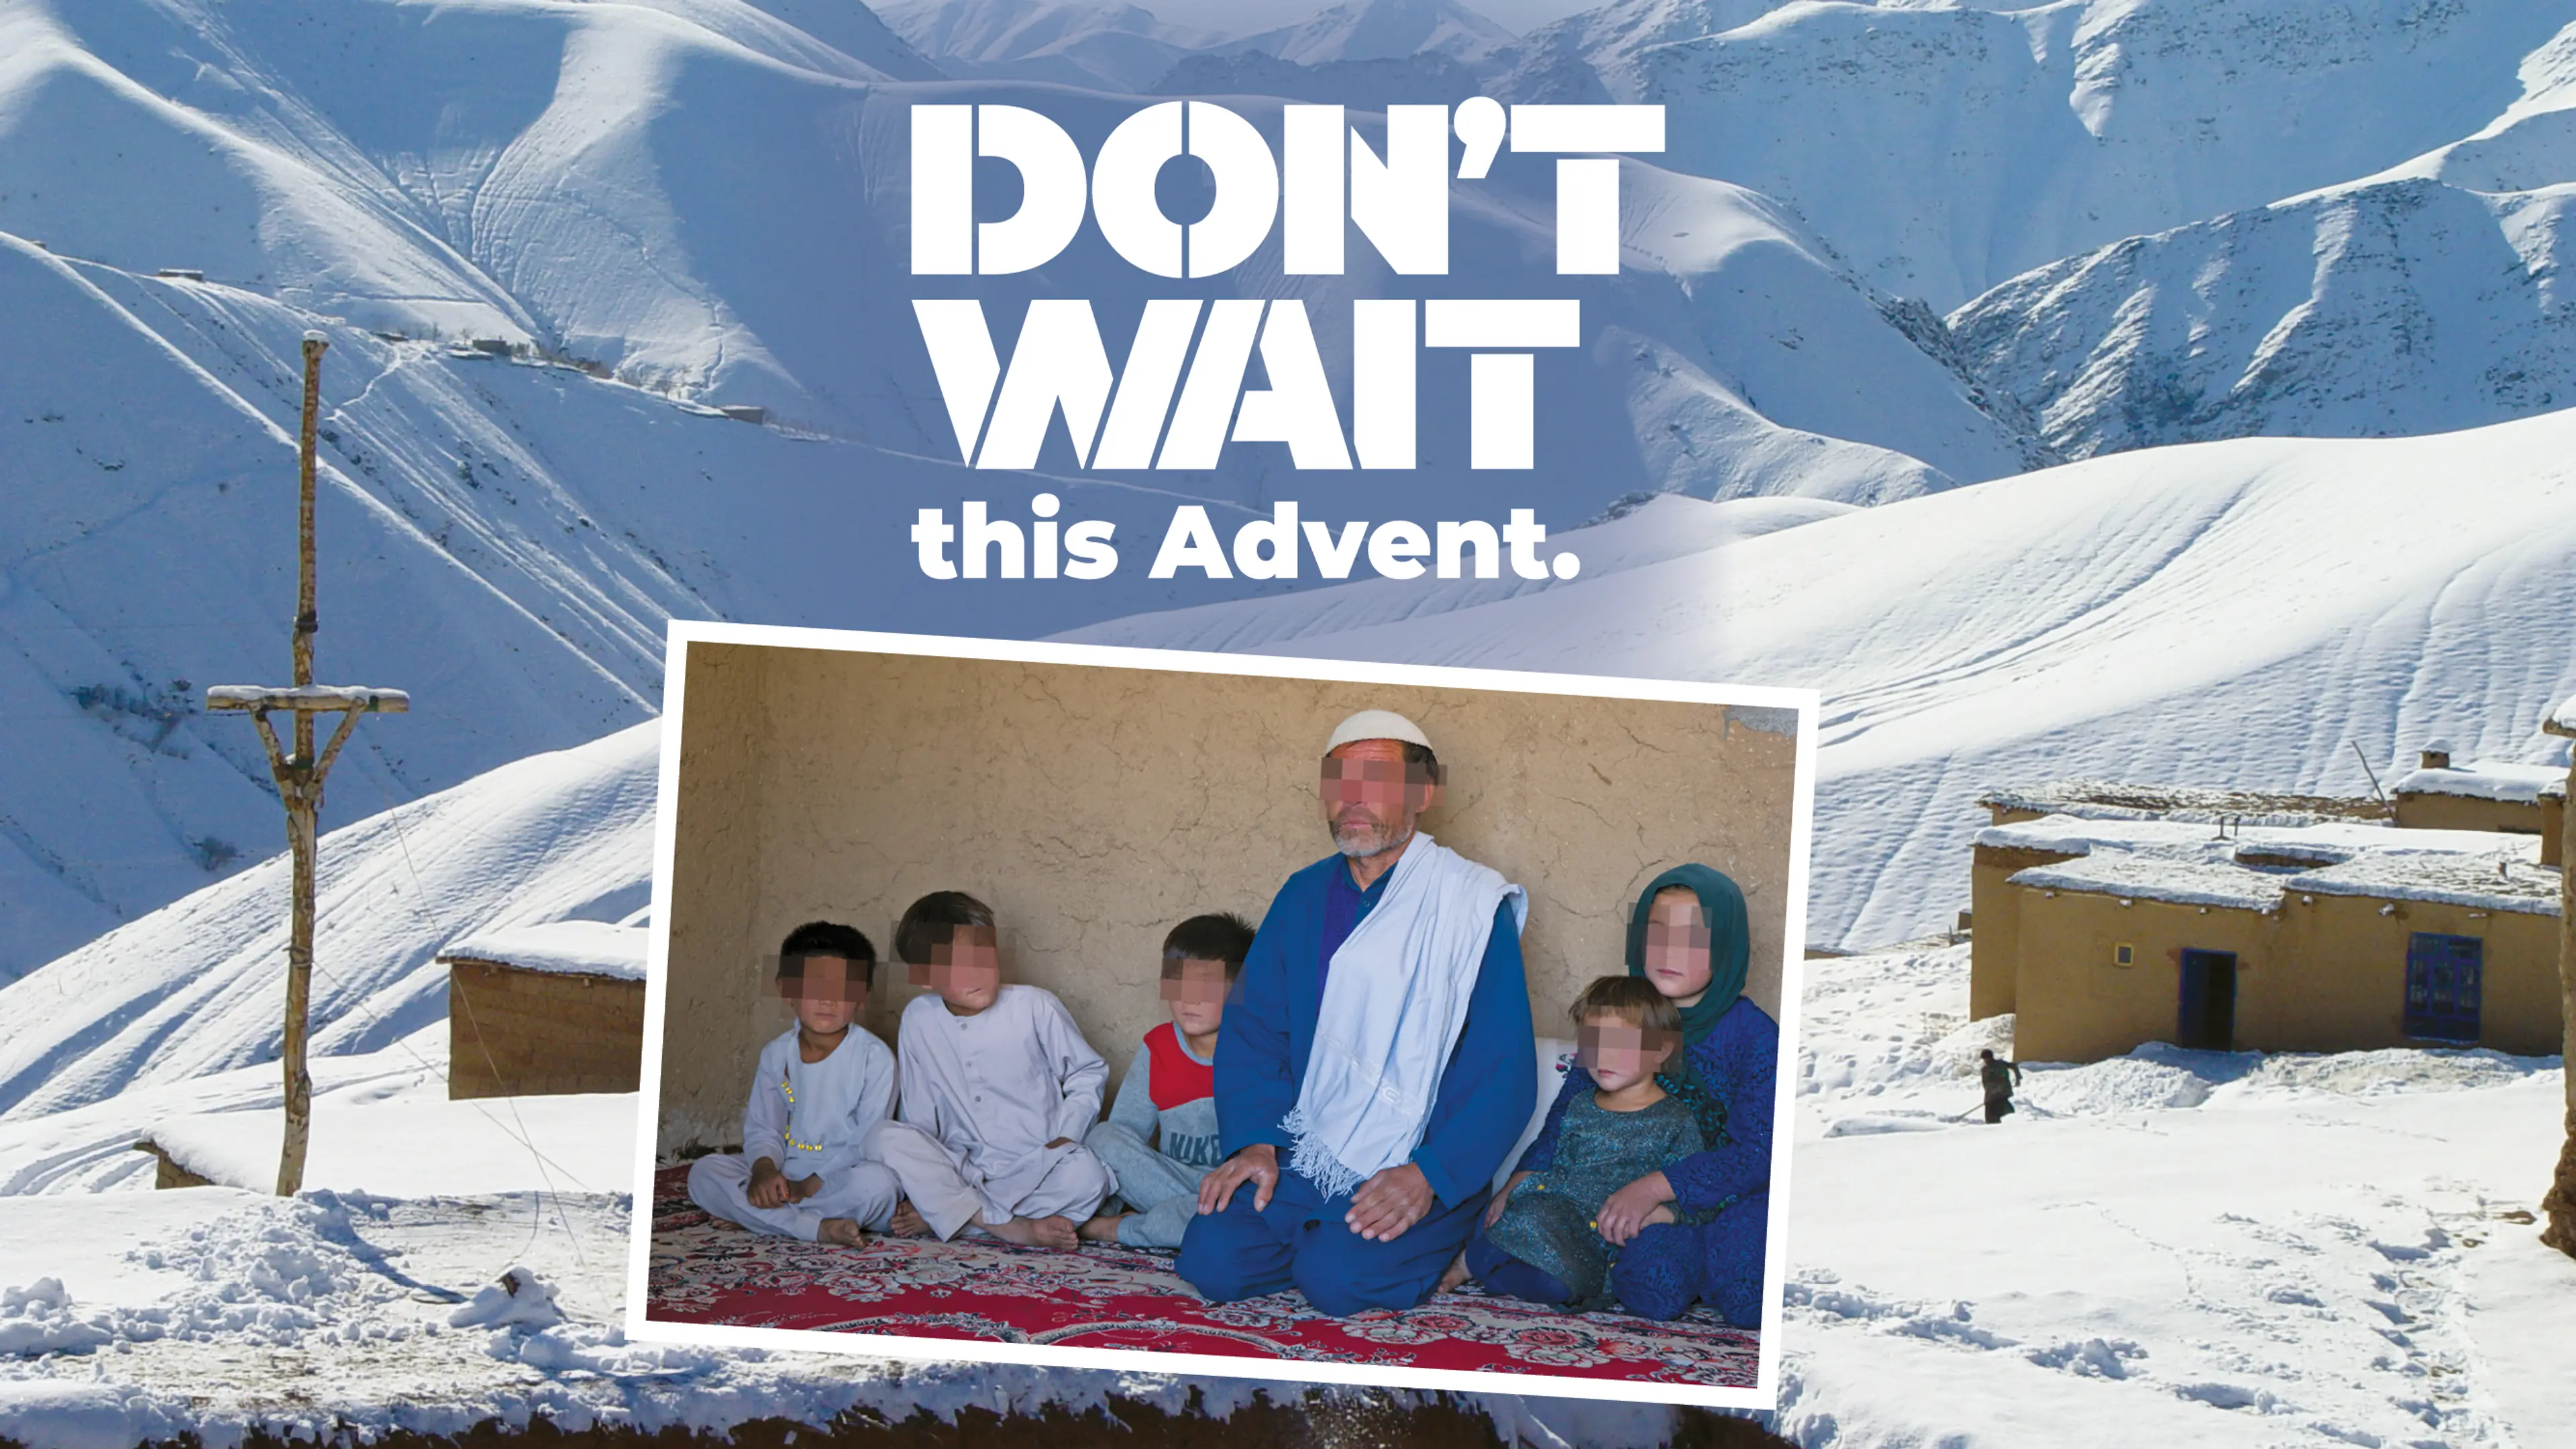 Don't wait to help this Advent